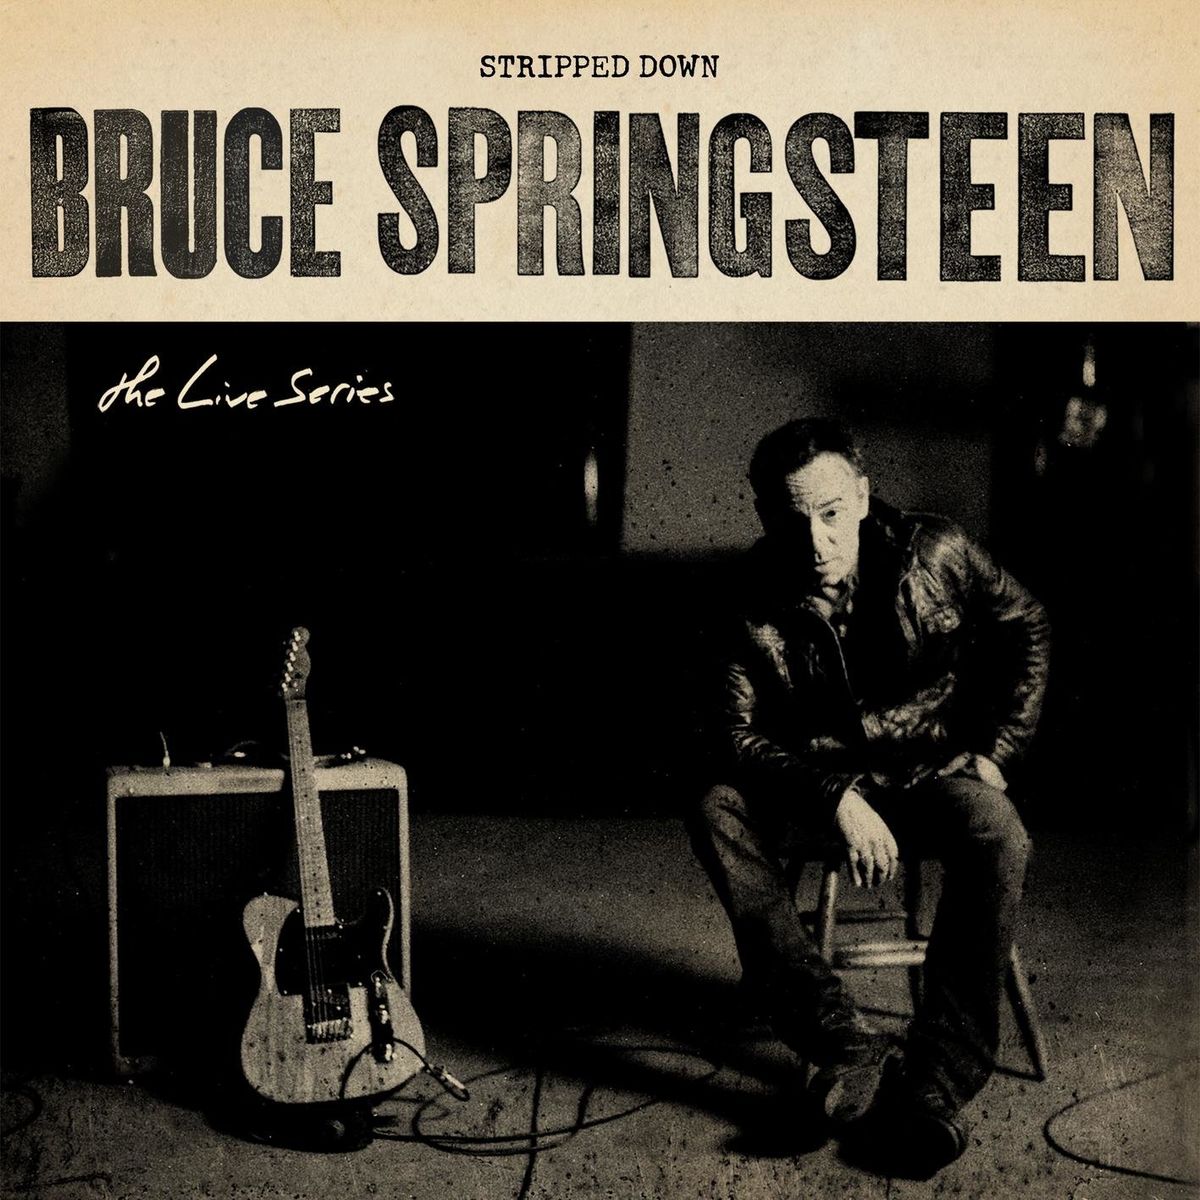 Art for Cynthia (Live at Schottenstein Center, Columbus, OH - 07/31/2005) by Bruce Springsteen